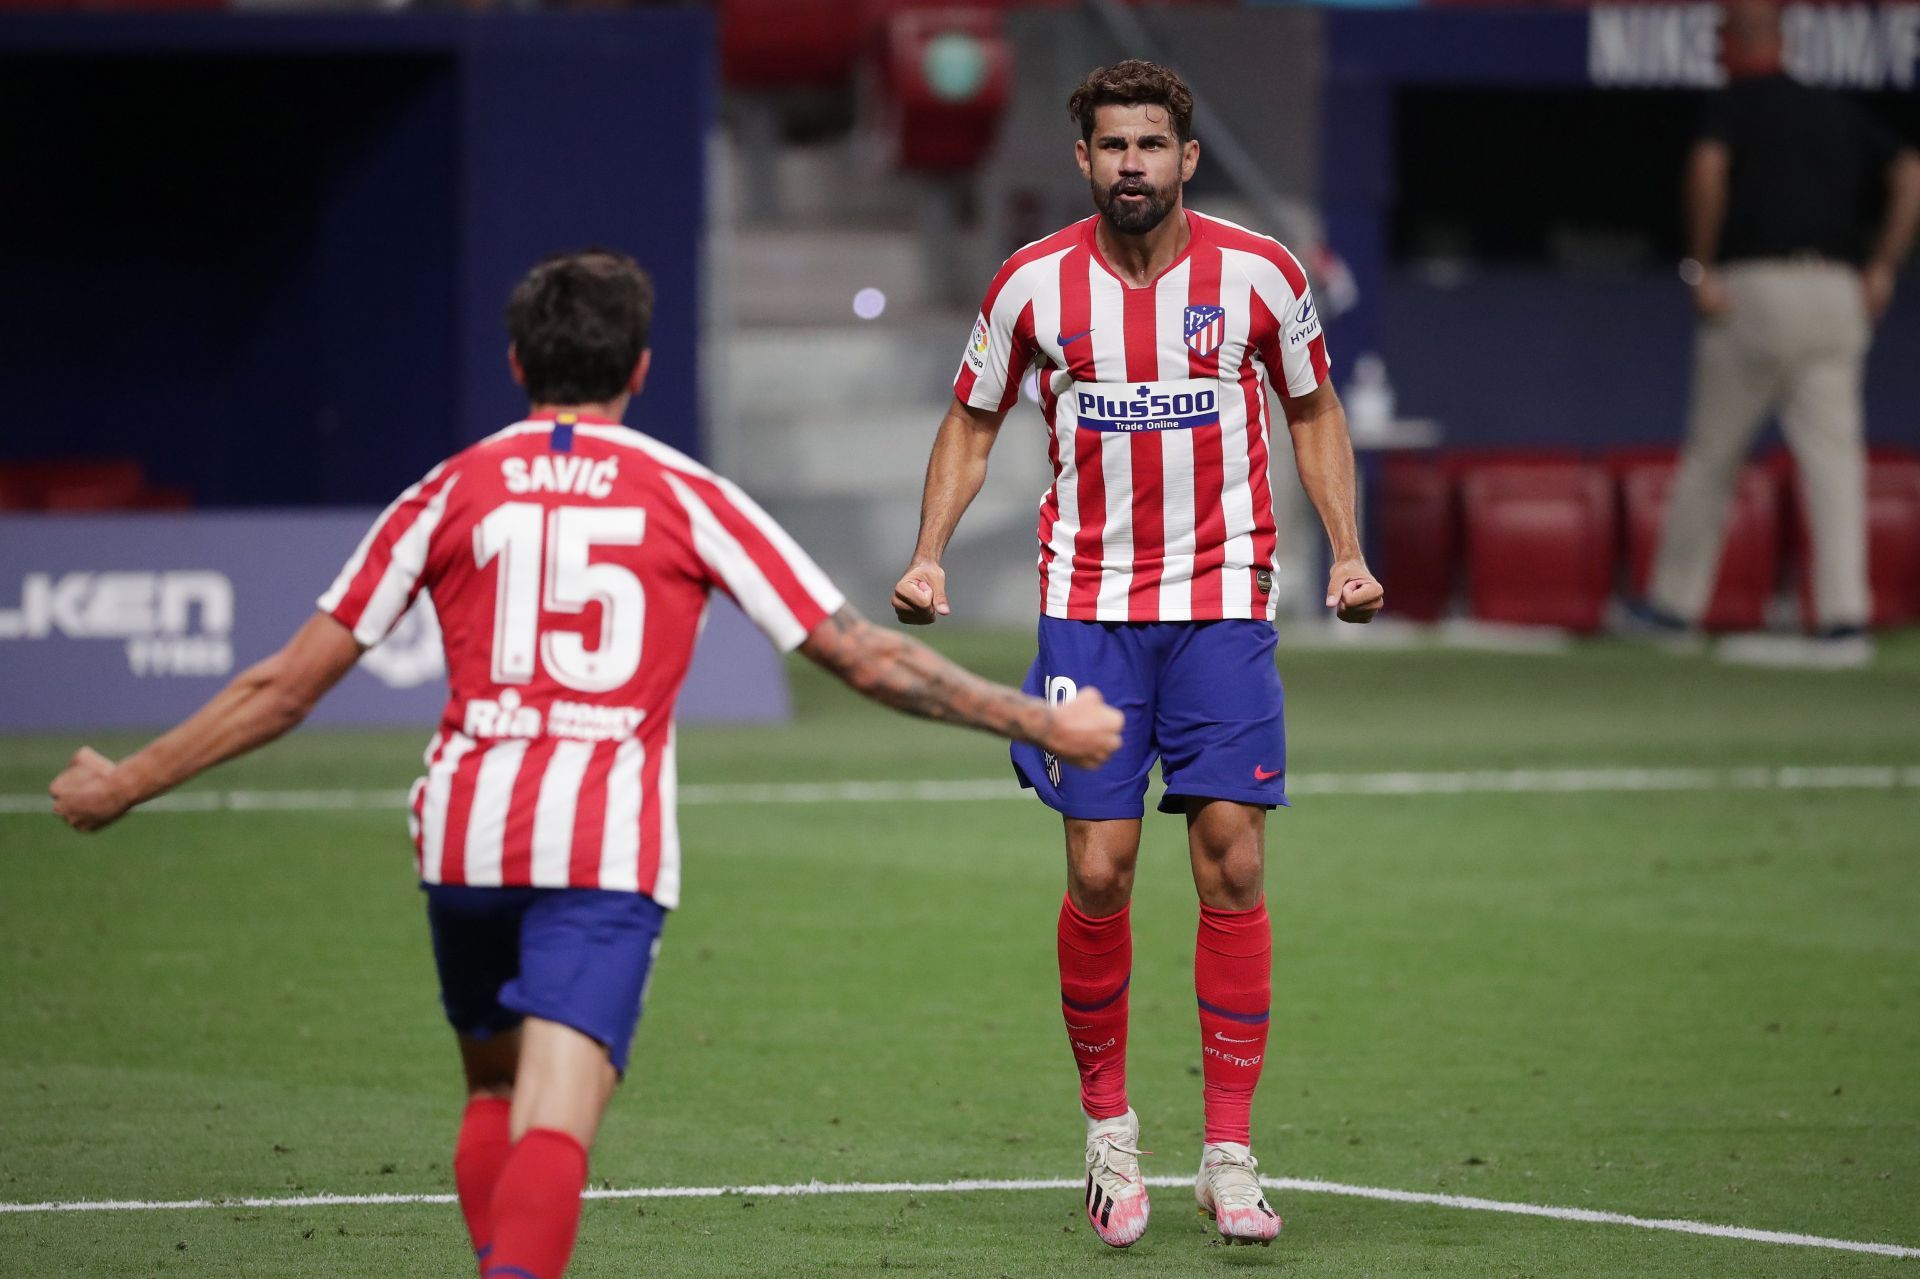 Diego Costa (right) celebratres with Stefan Savic (#15) of Atletico Madrid.